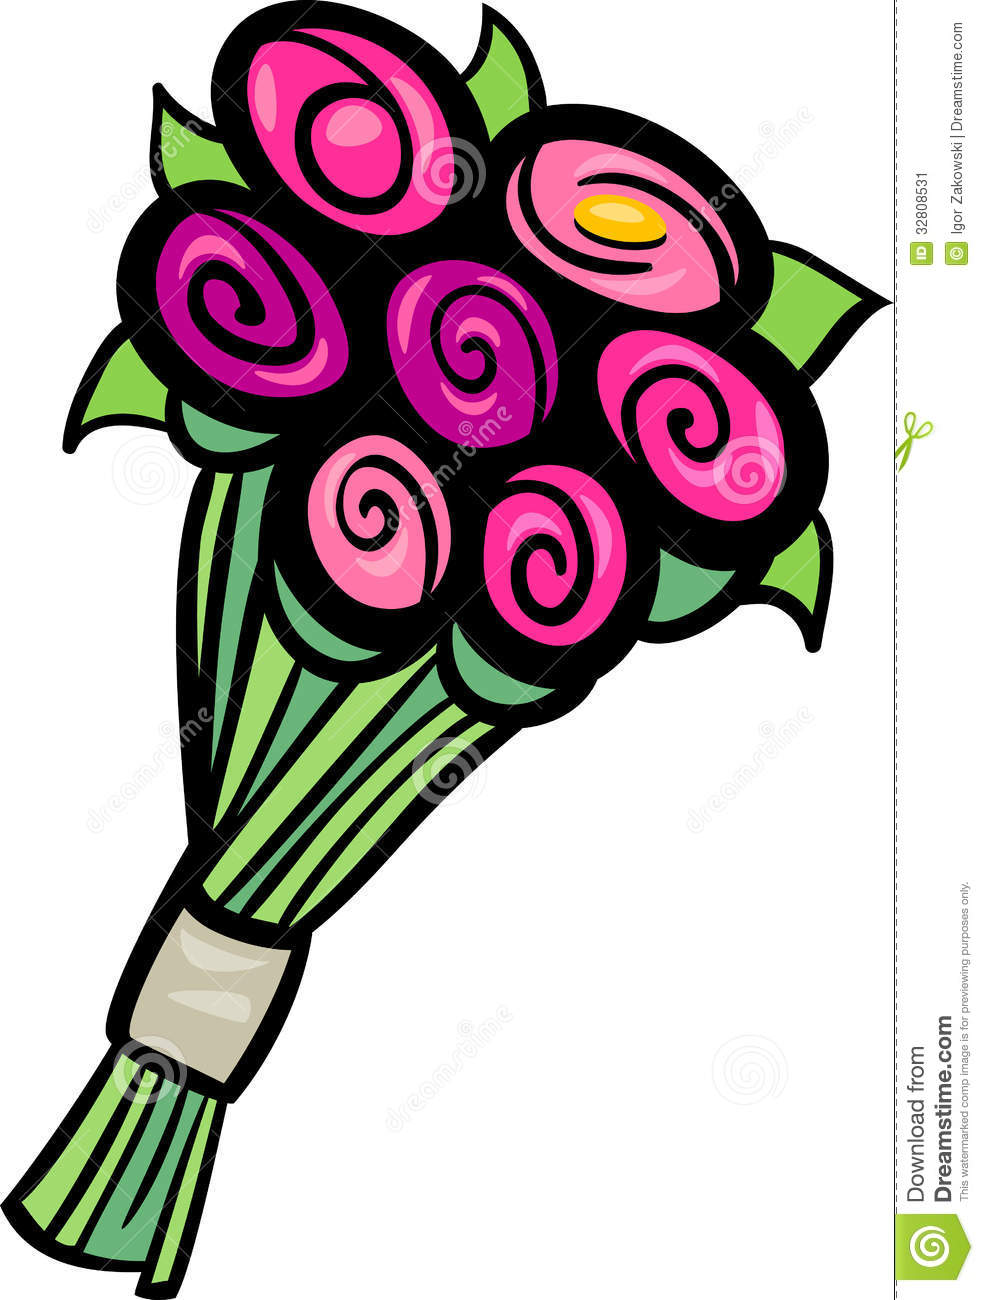 Bouquet clipart #14, Download drawings